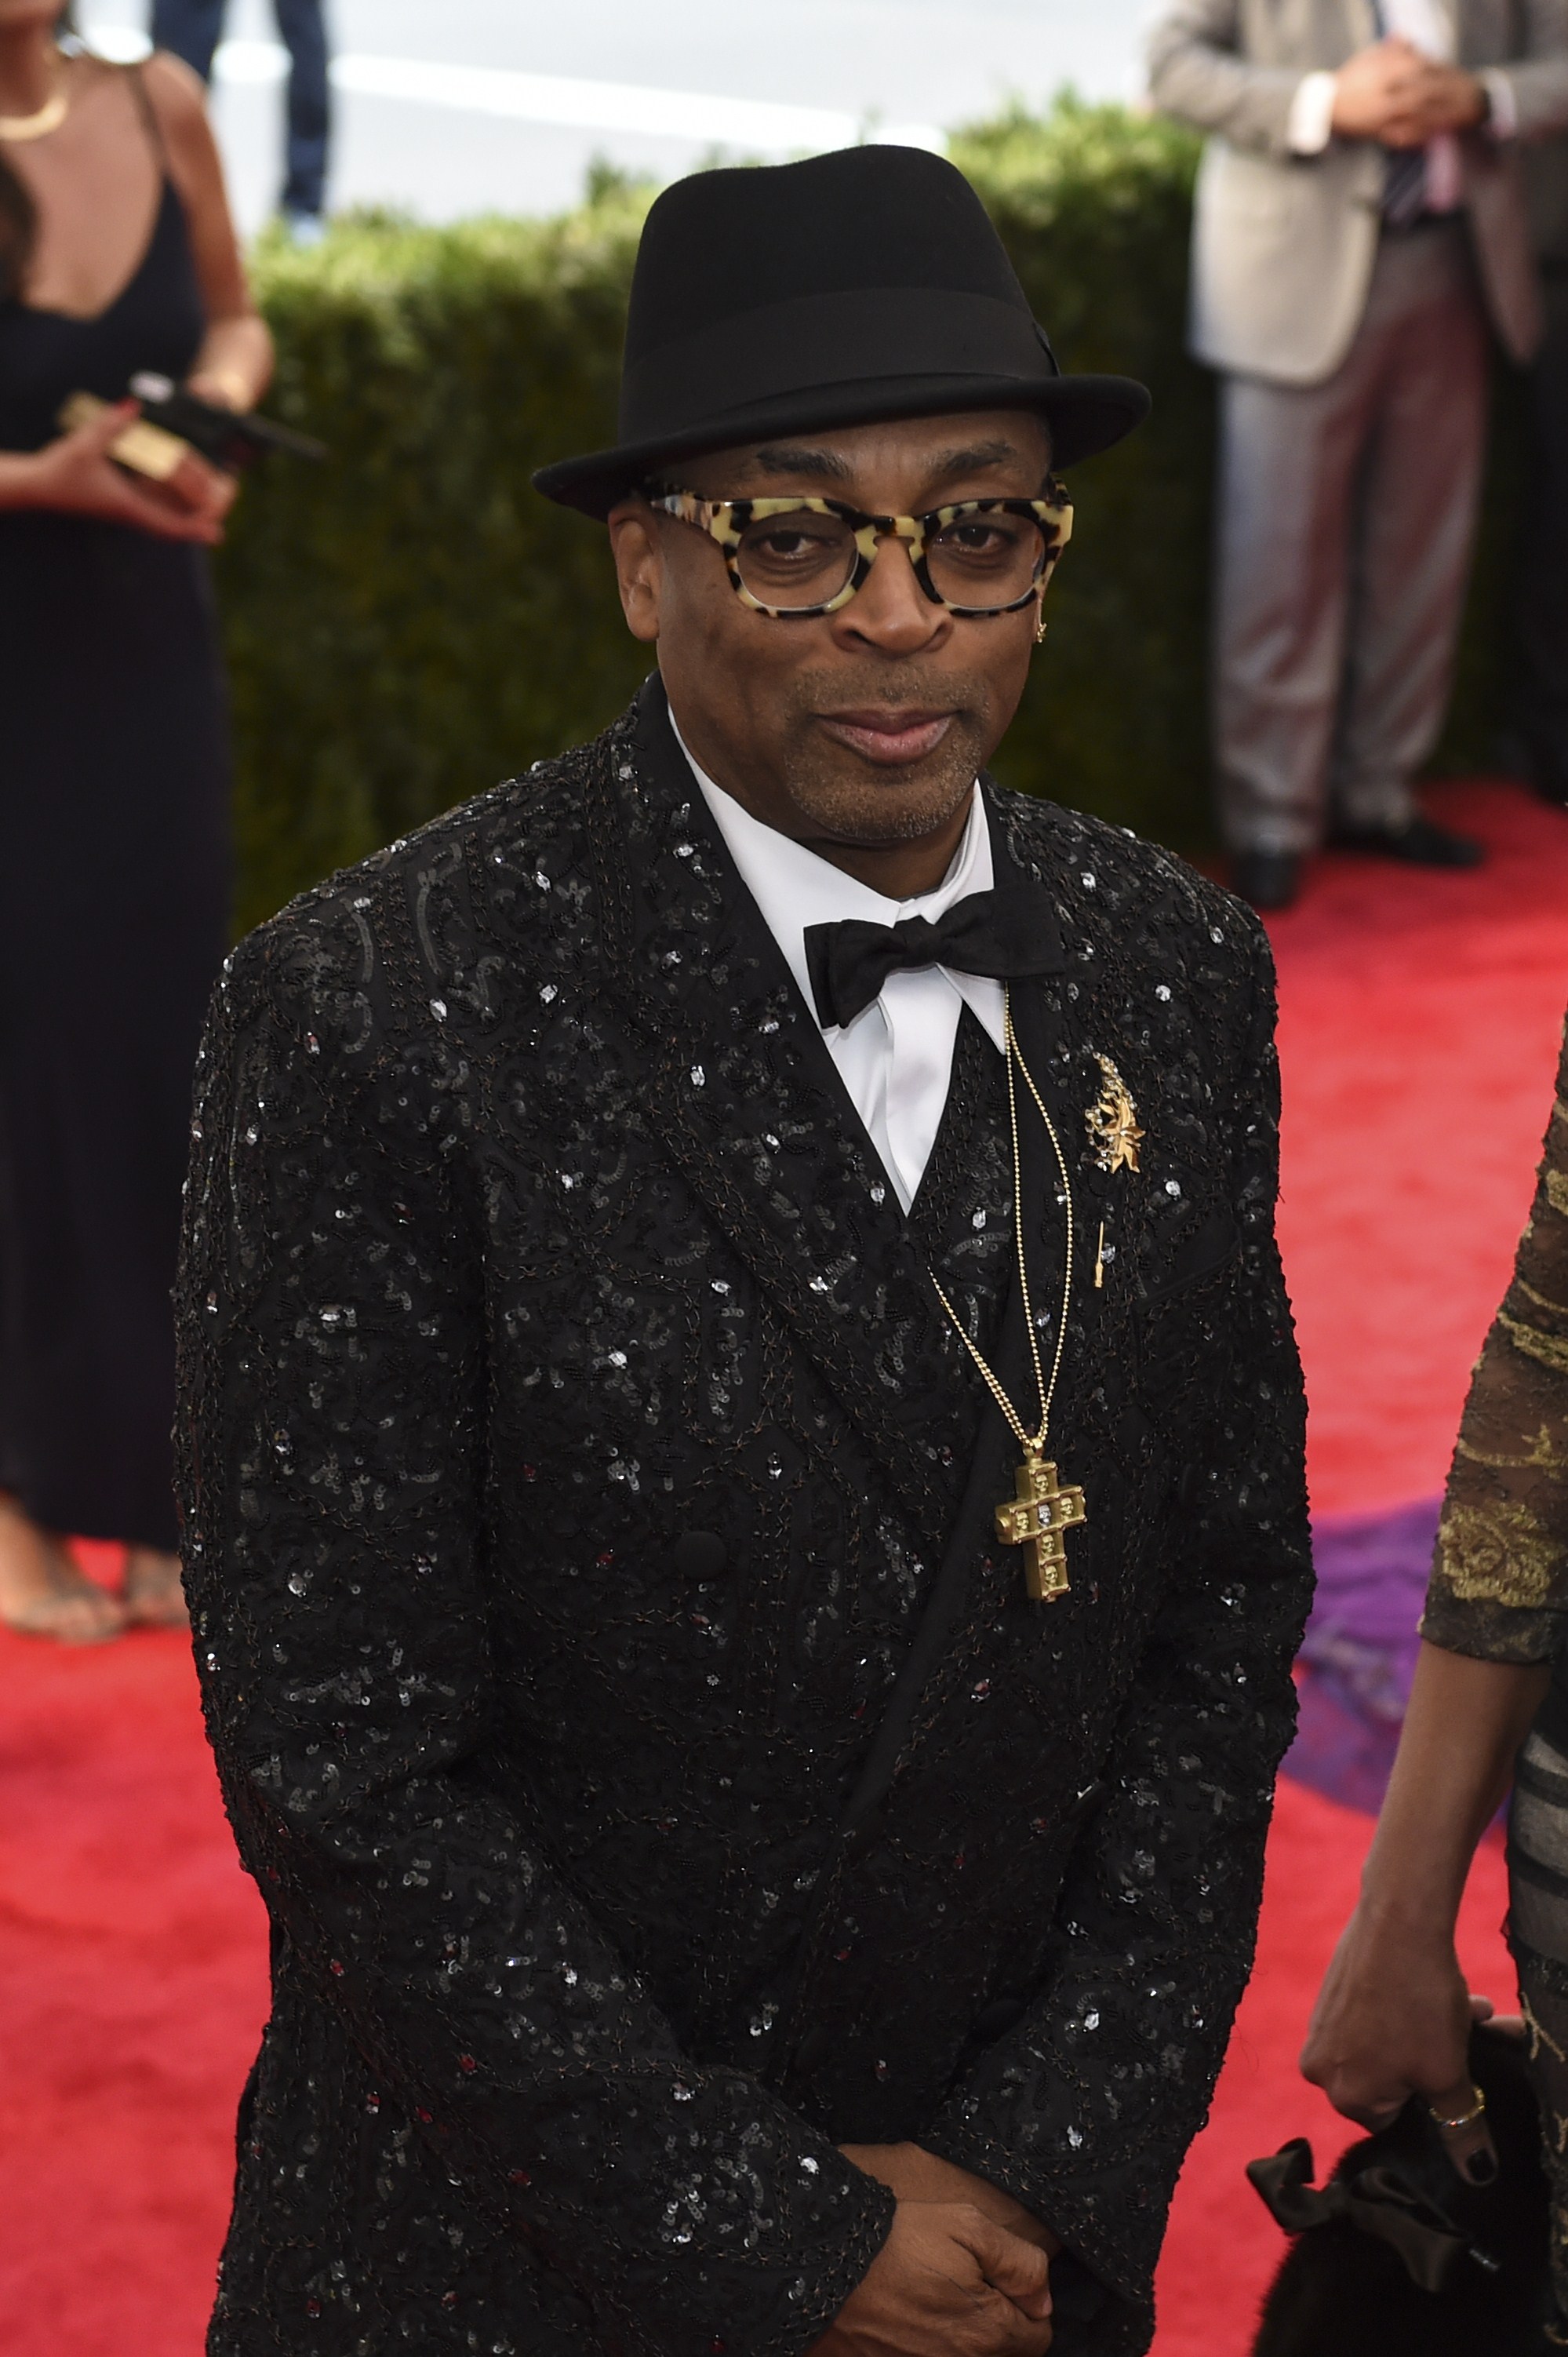 Spike Lee arrives at the Costume Institute Gala Benefit at The Metropolitan Museum of Art May 5, 2015 in New York. (Timothy A. Clary&mdash;AFP/Getty Images)